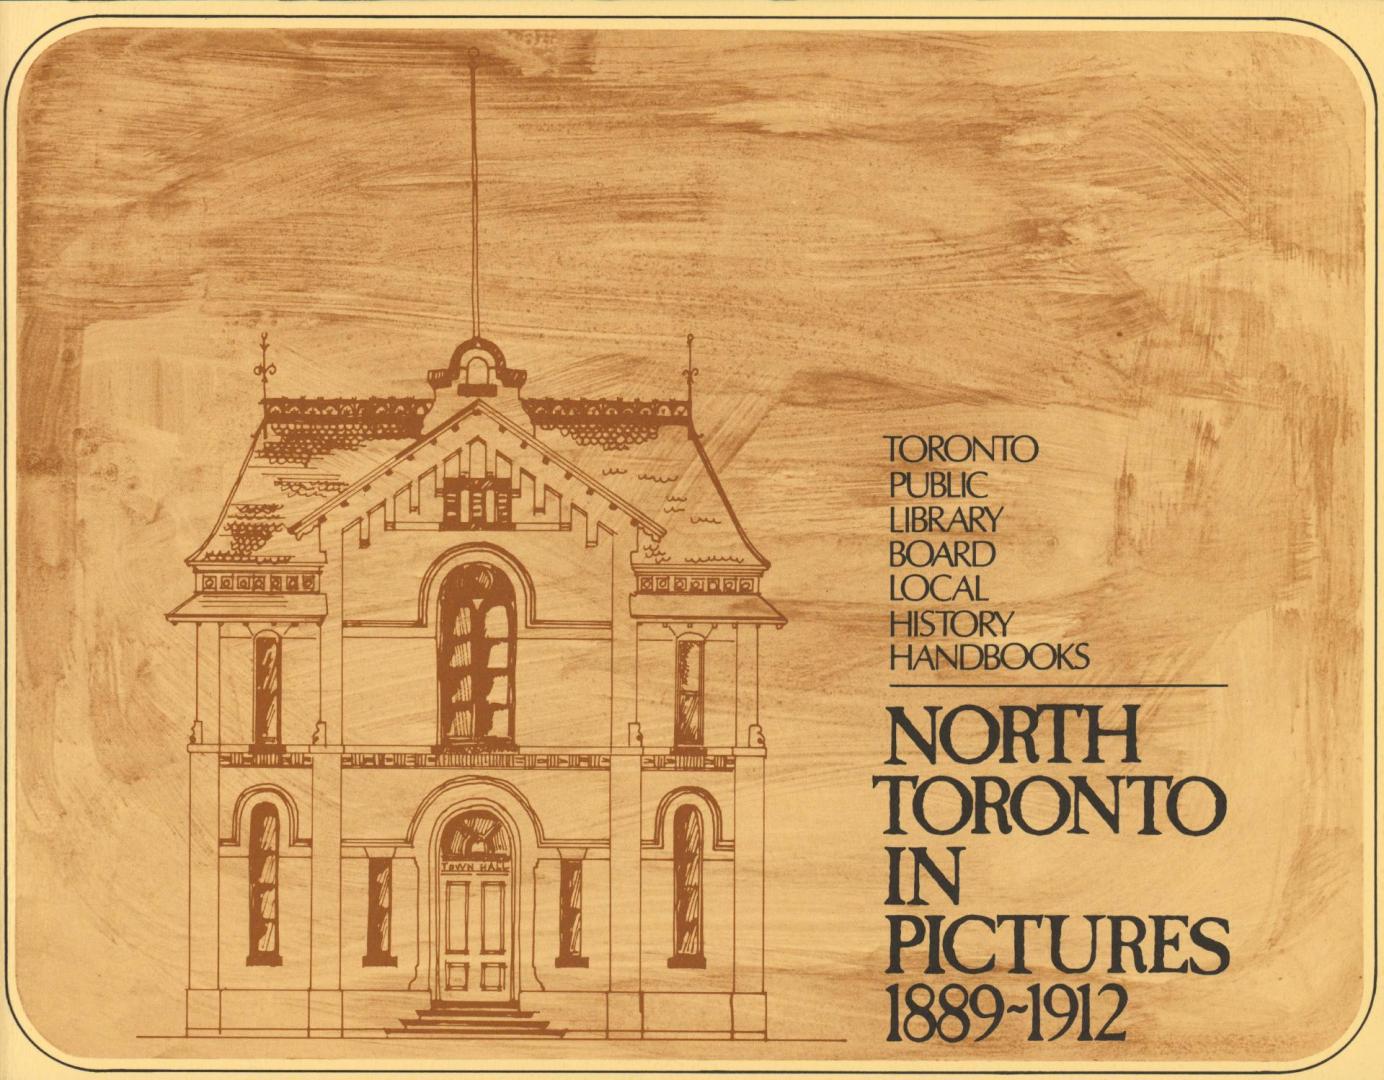 Image shows a cover page of local history handbook &quot; North Toronto in Pictures 1889-1912 b ...